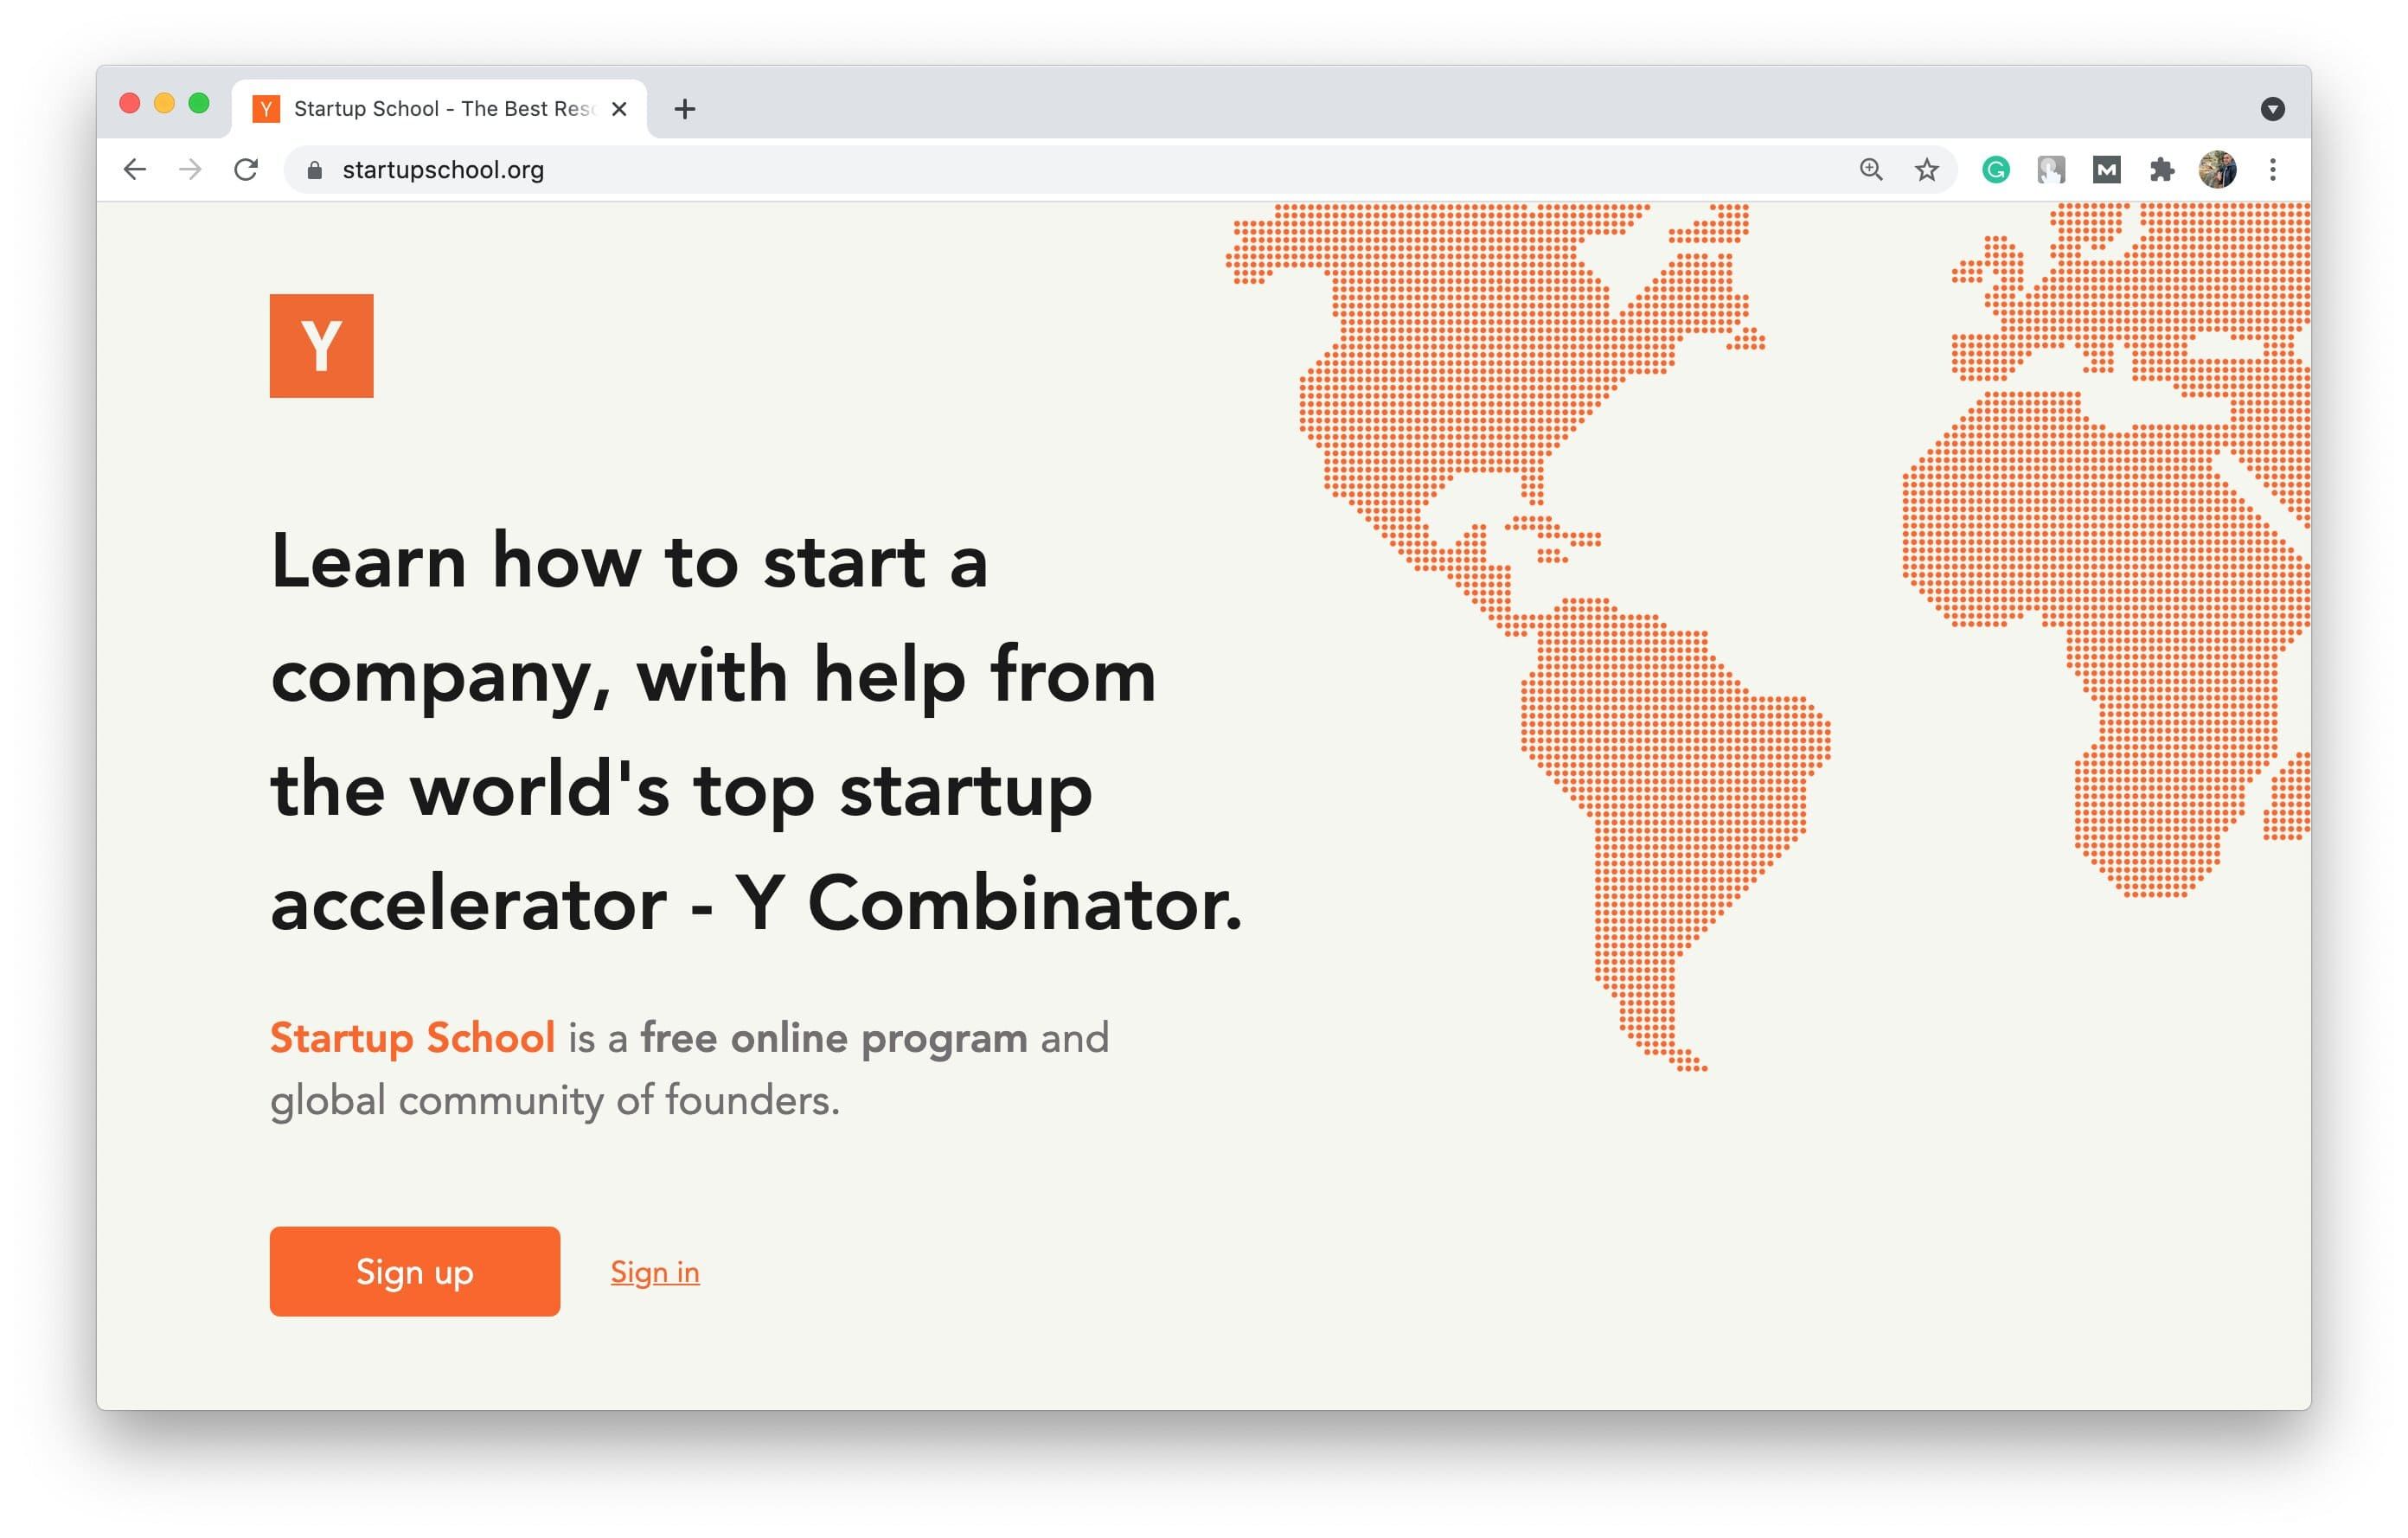 Famous startup accelerators as Y Combinator can provide companies coworking spaces and paid servers for their work (*image by [Y Combinator Startup School](https://www.startupschool.org/){ rel="nofollow" target="_blank" .default-md}*)